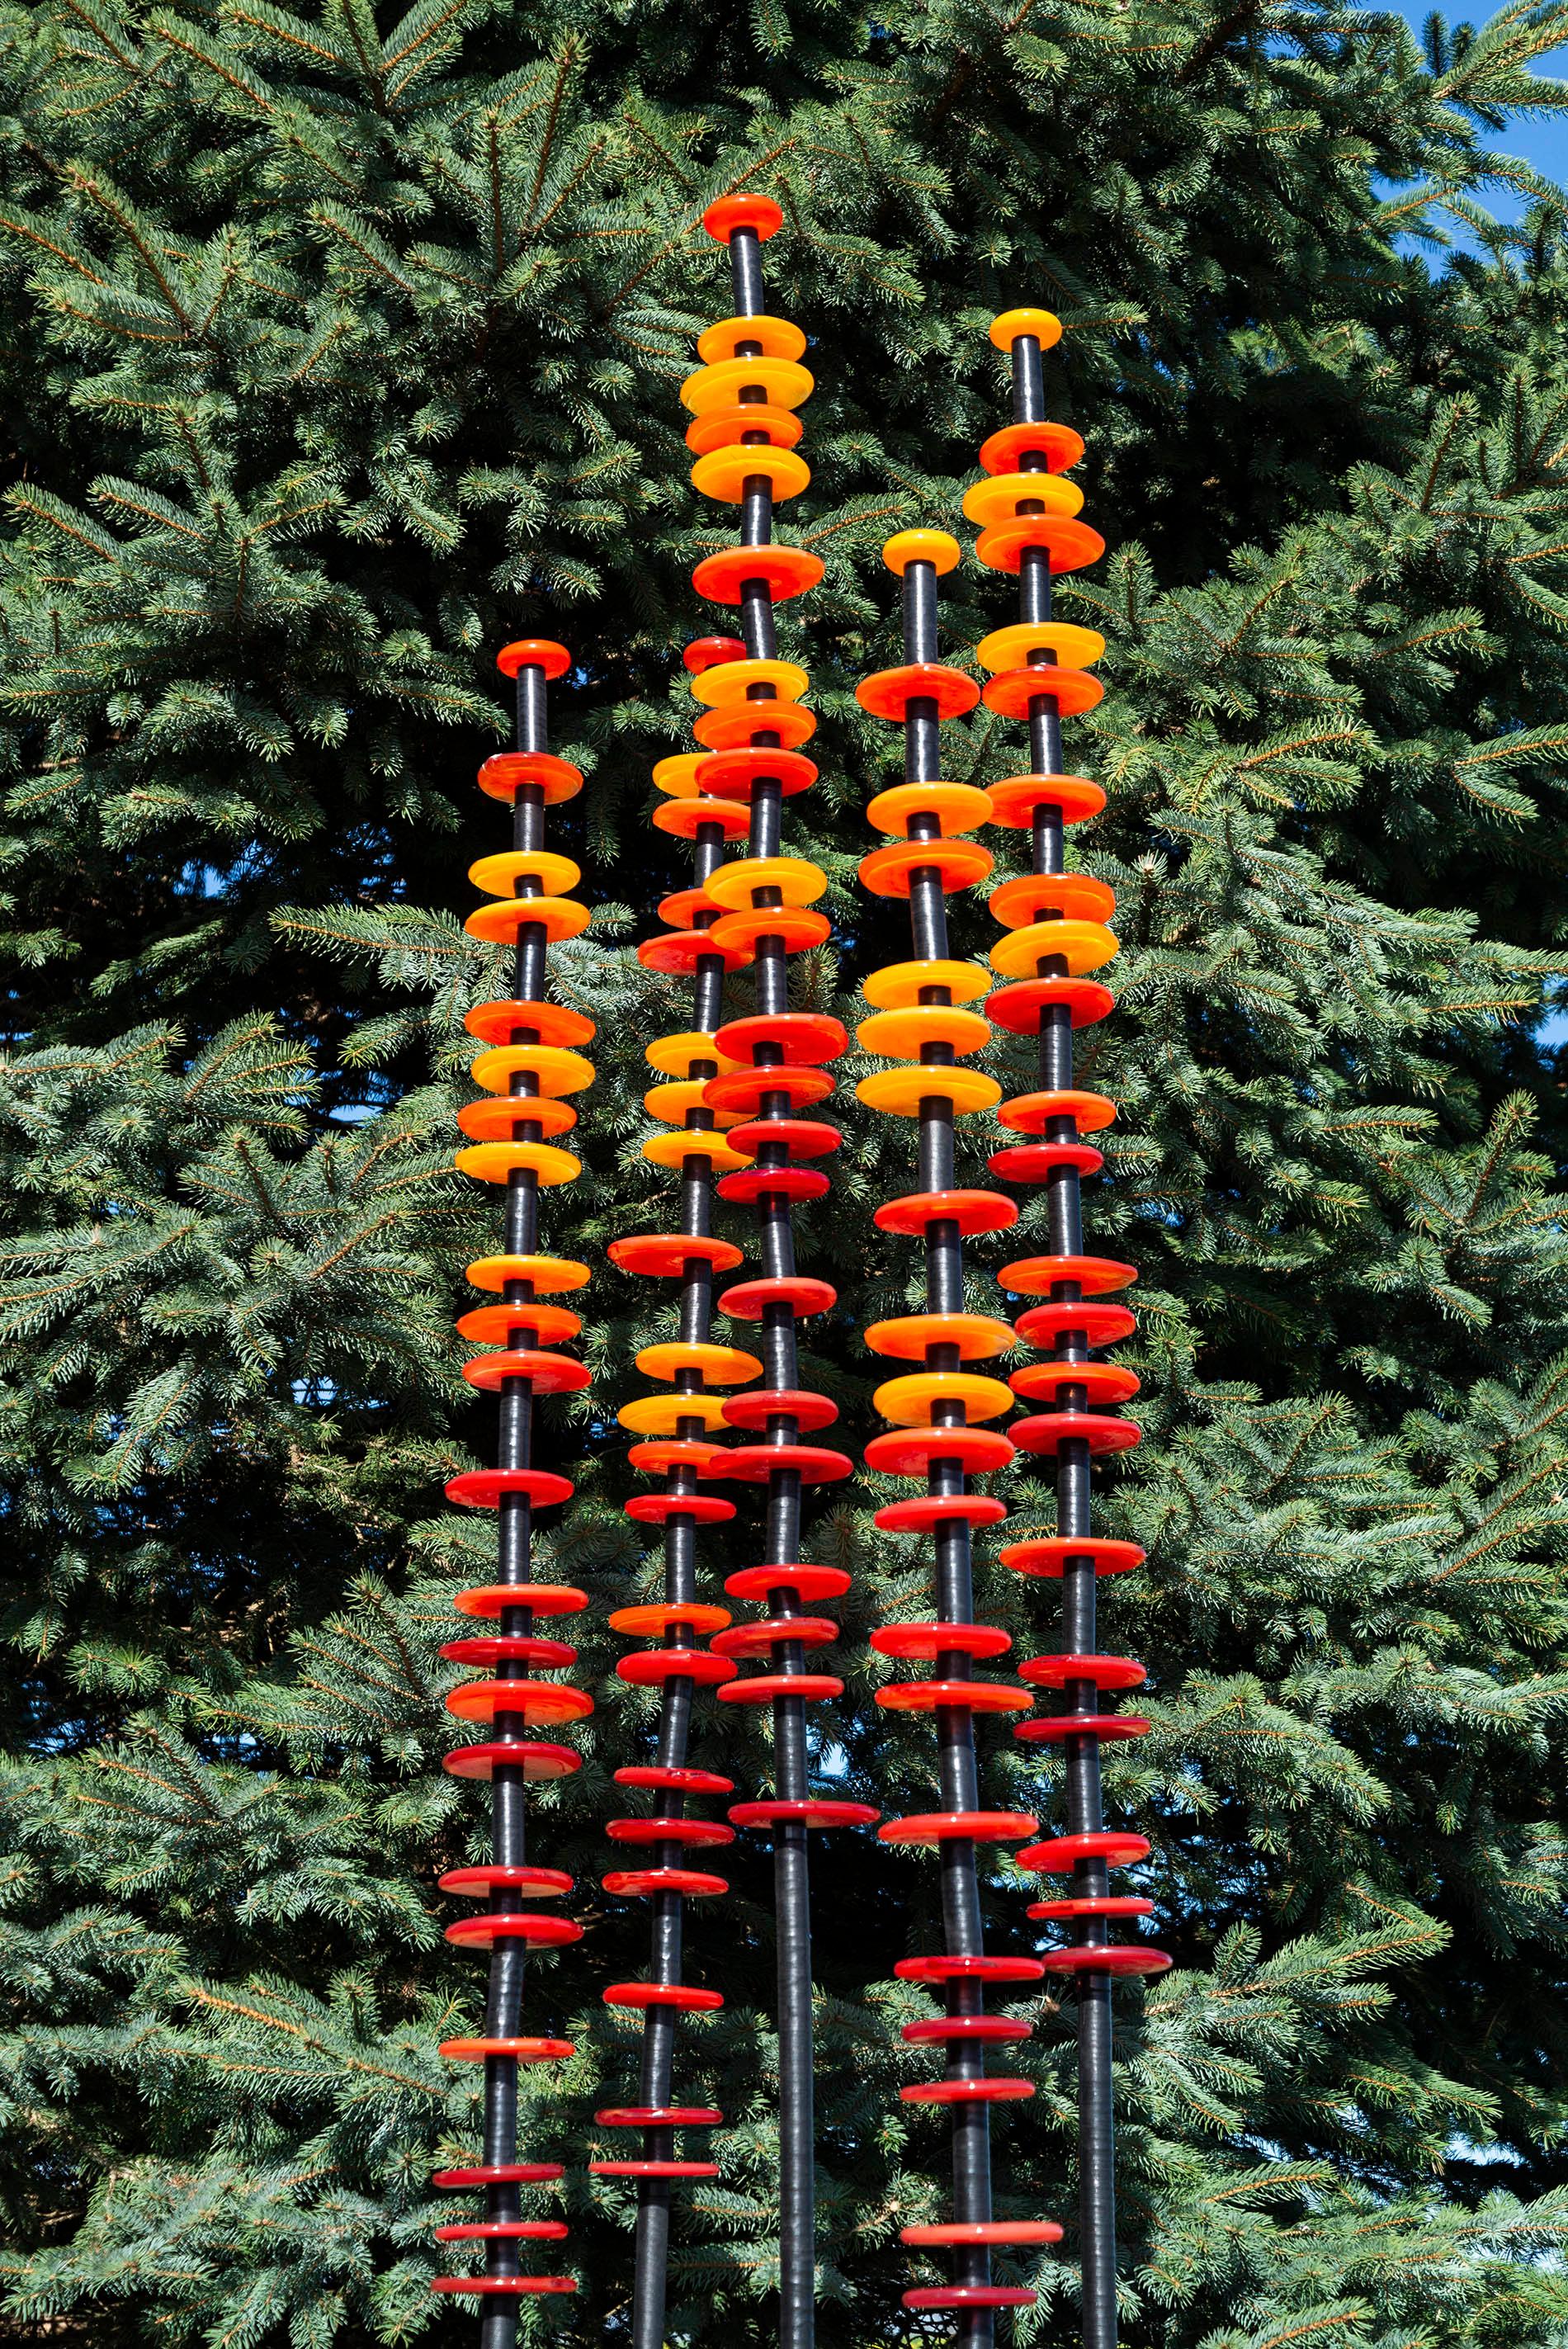 The colours of a hot summer sun—a juicy orange and a golden yellow are captured in glass in this compelling outdoor sculpture by Susan Rankin. The Canadian artist’s garden columns were inspired by her love of gardening and deep respect for nature’s